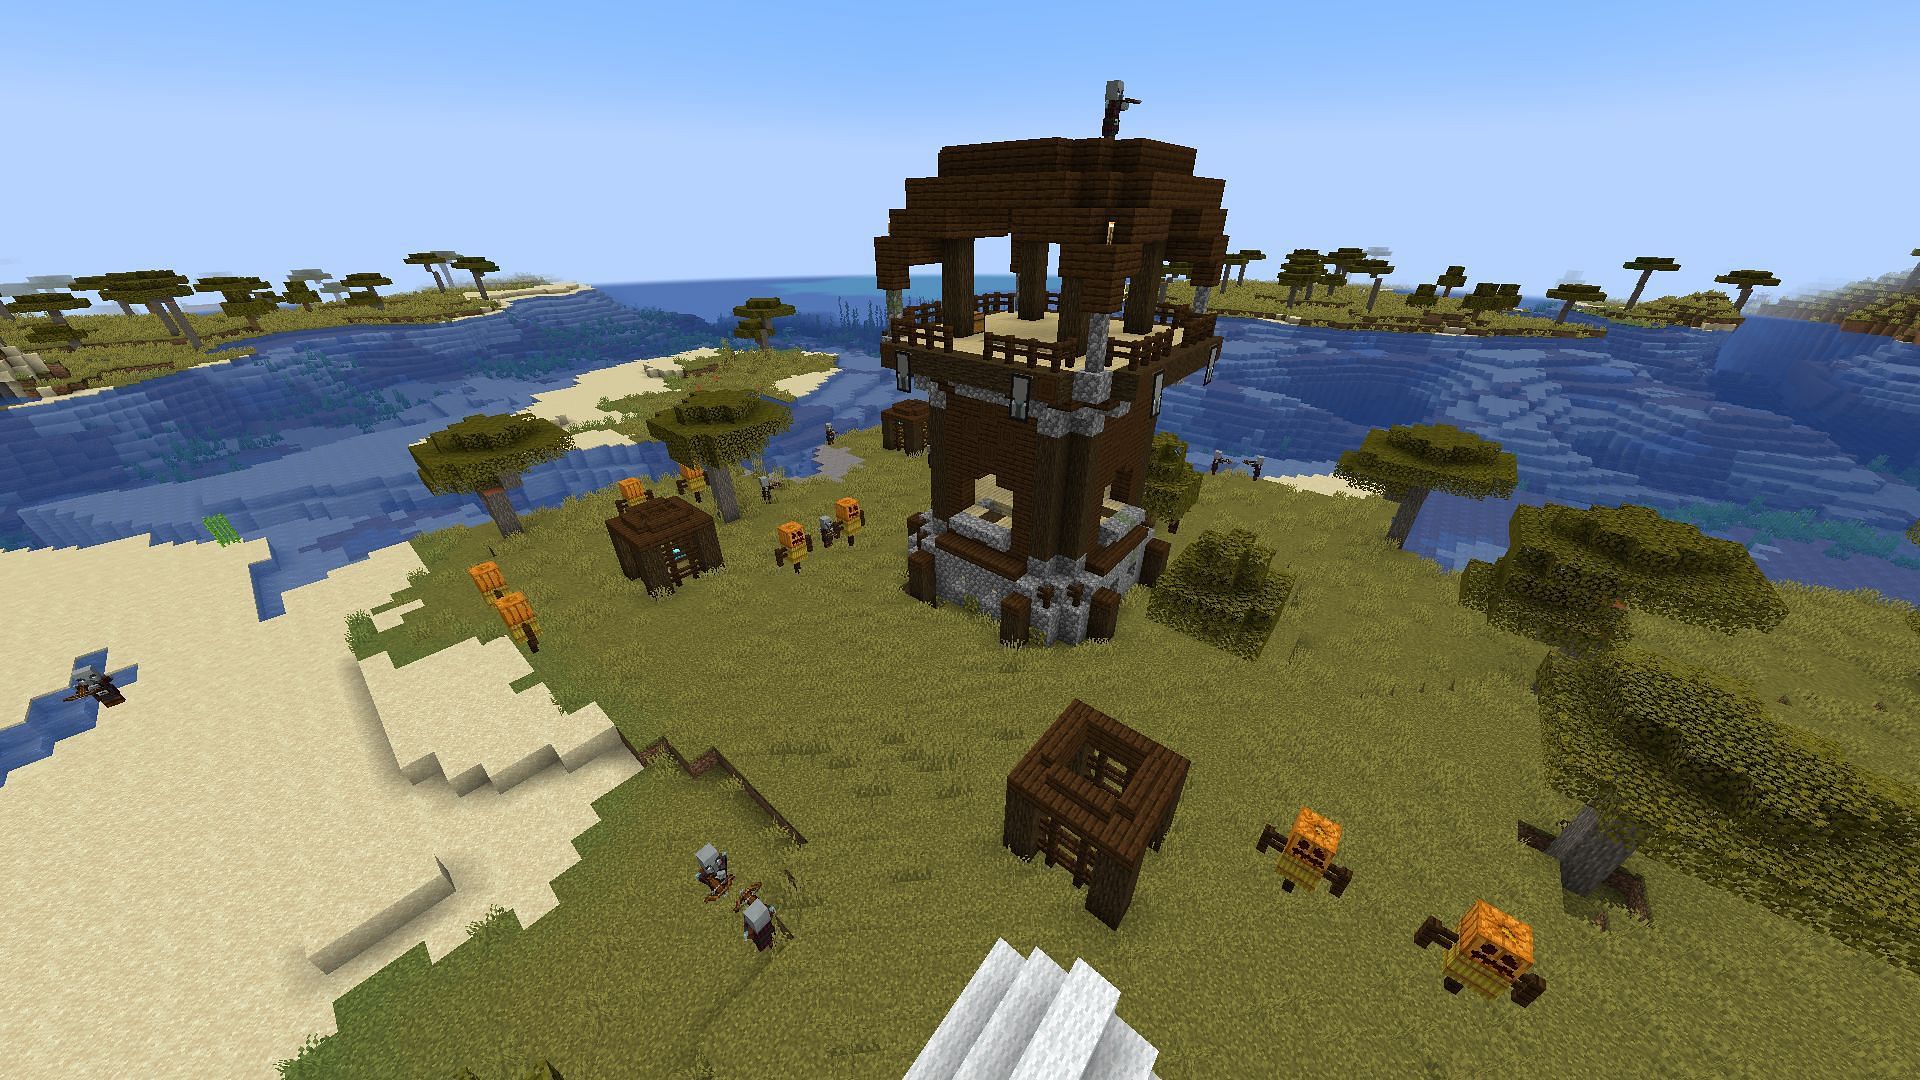 Apart from the new goat horn, there is not much to loot in Pillager Outpost in Minecraft (Image via Mojang)